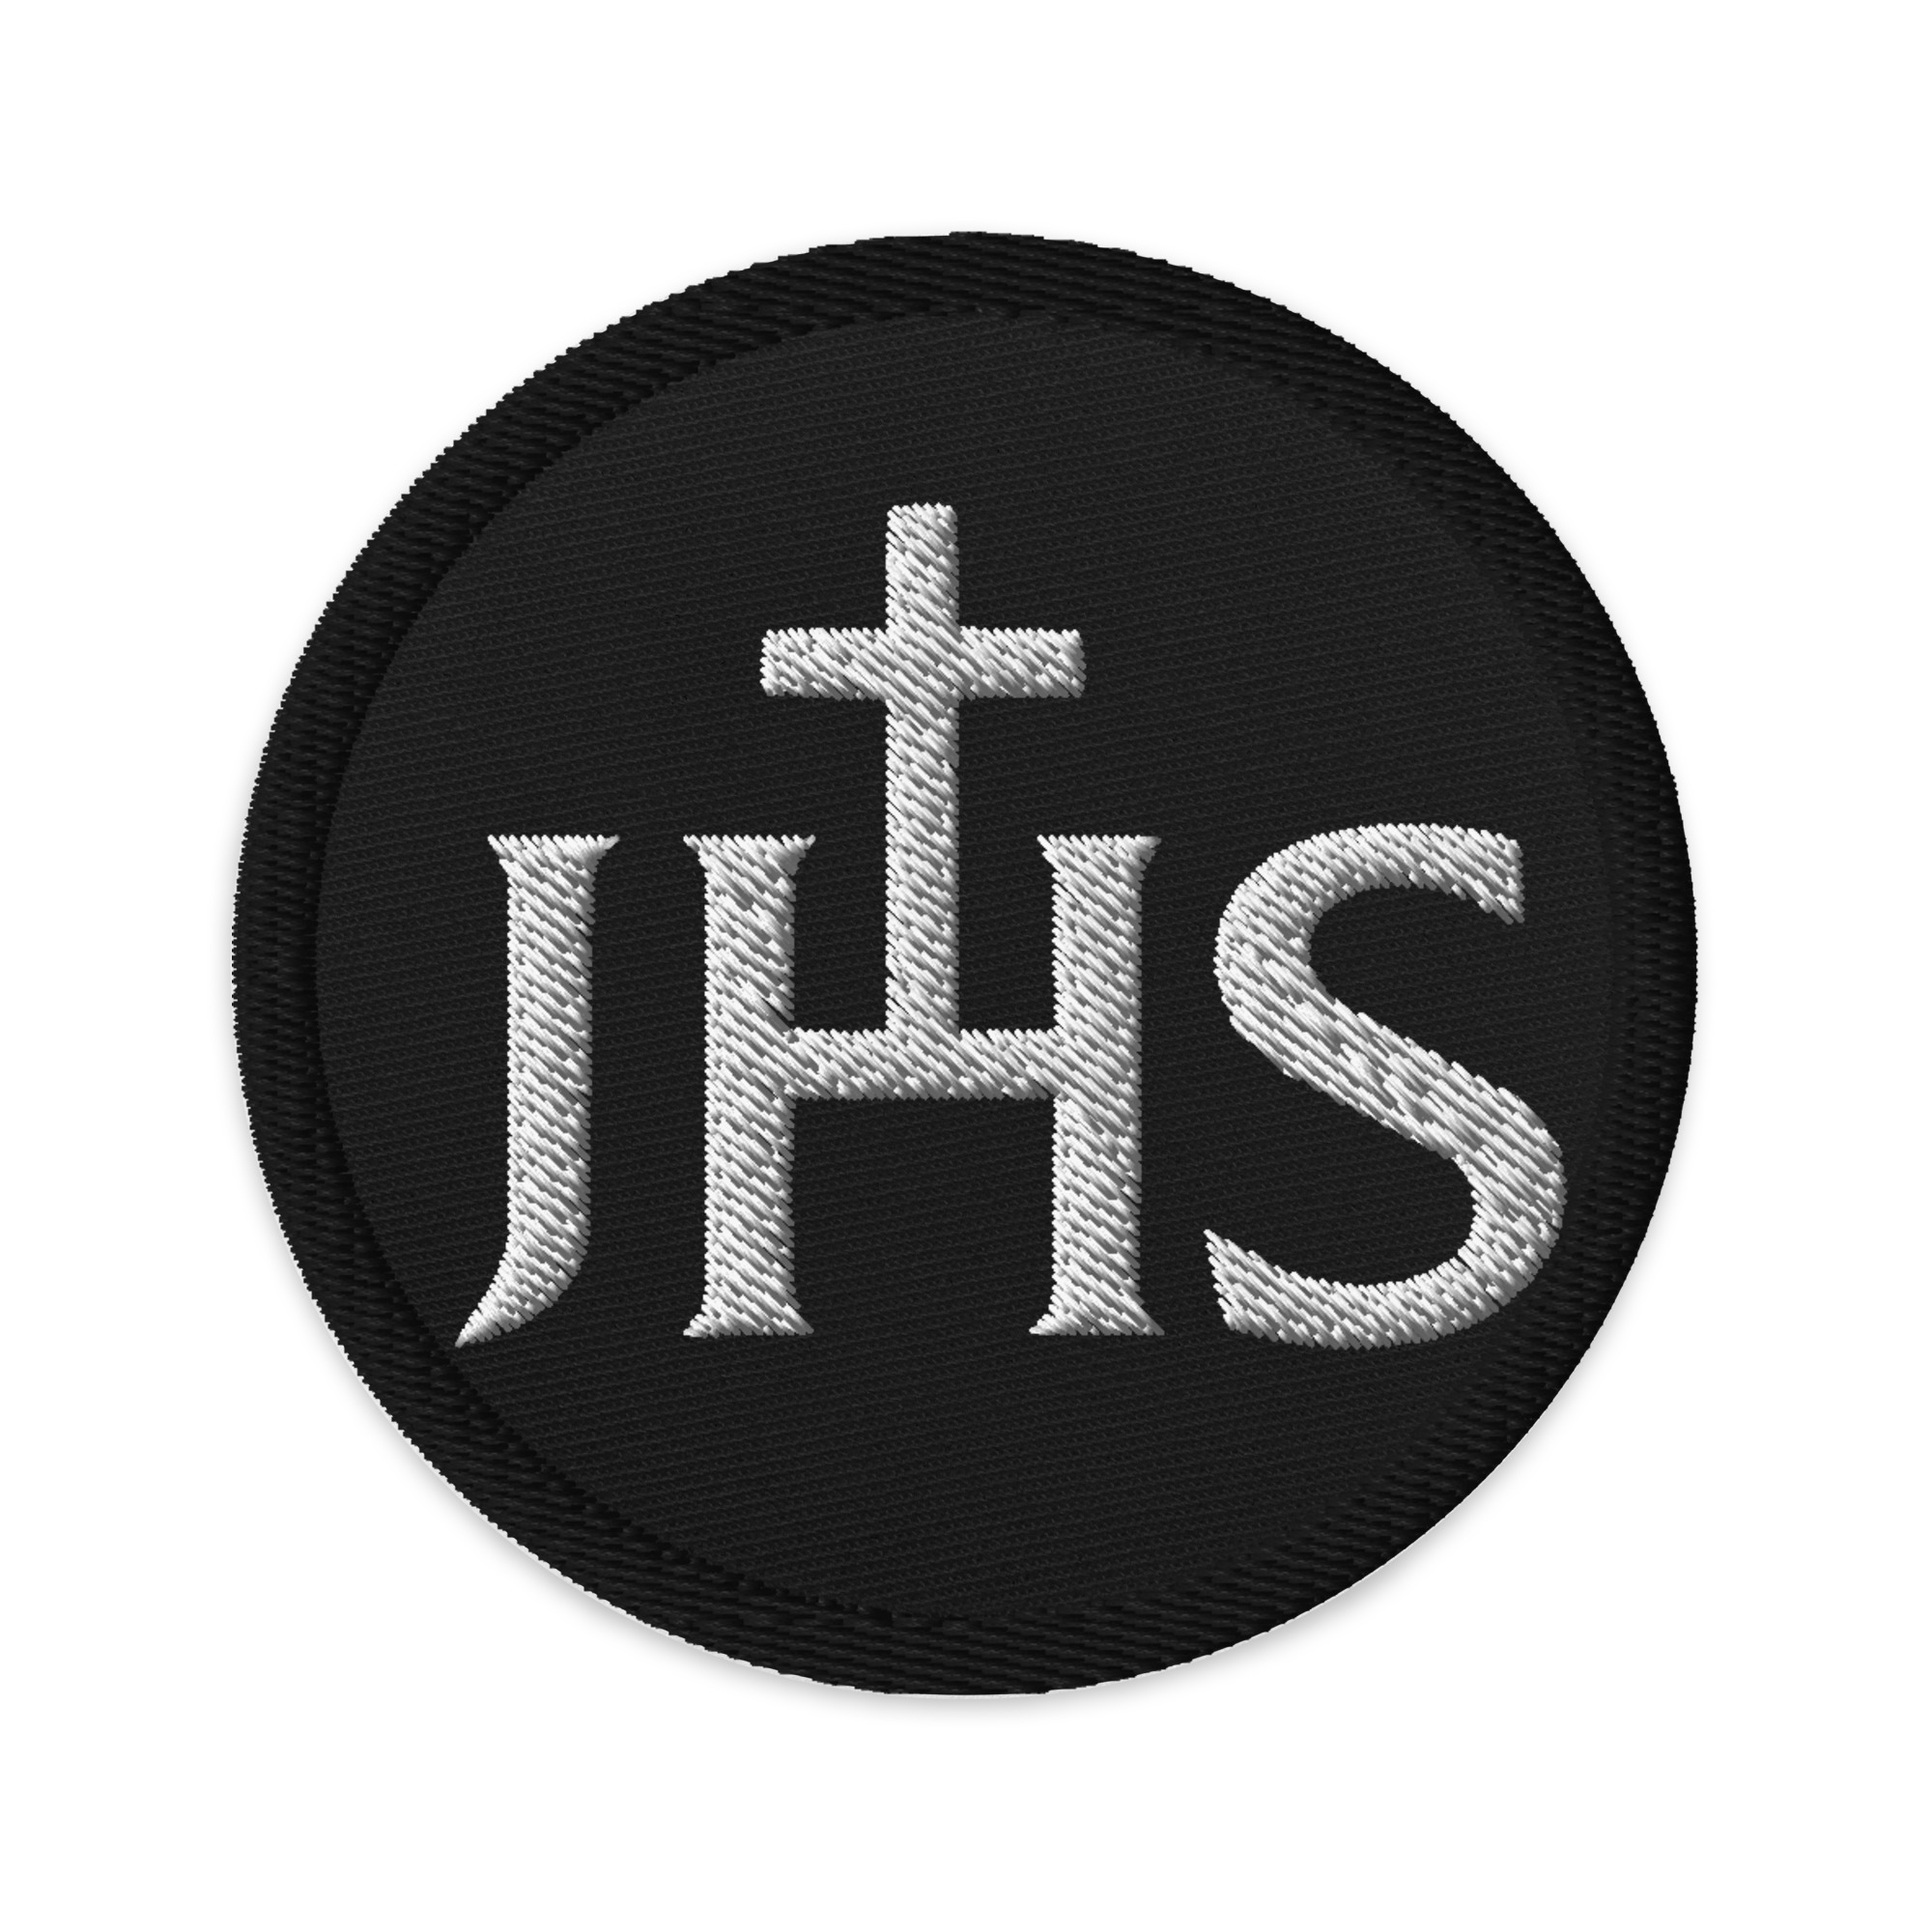 Christogram IHS white over black Embroidered patches